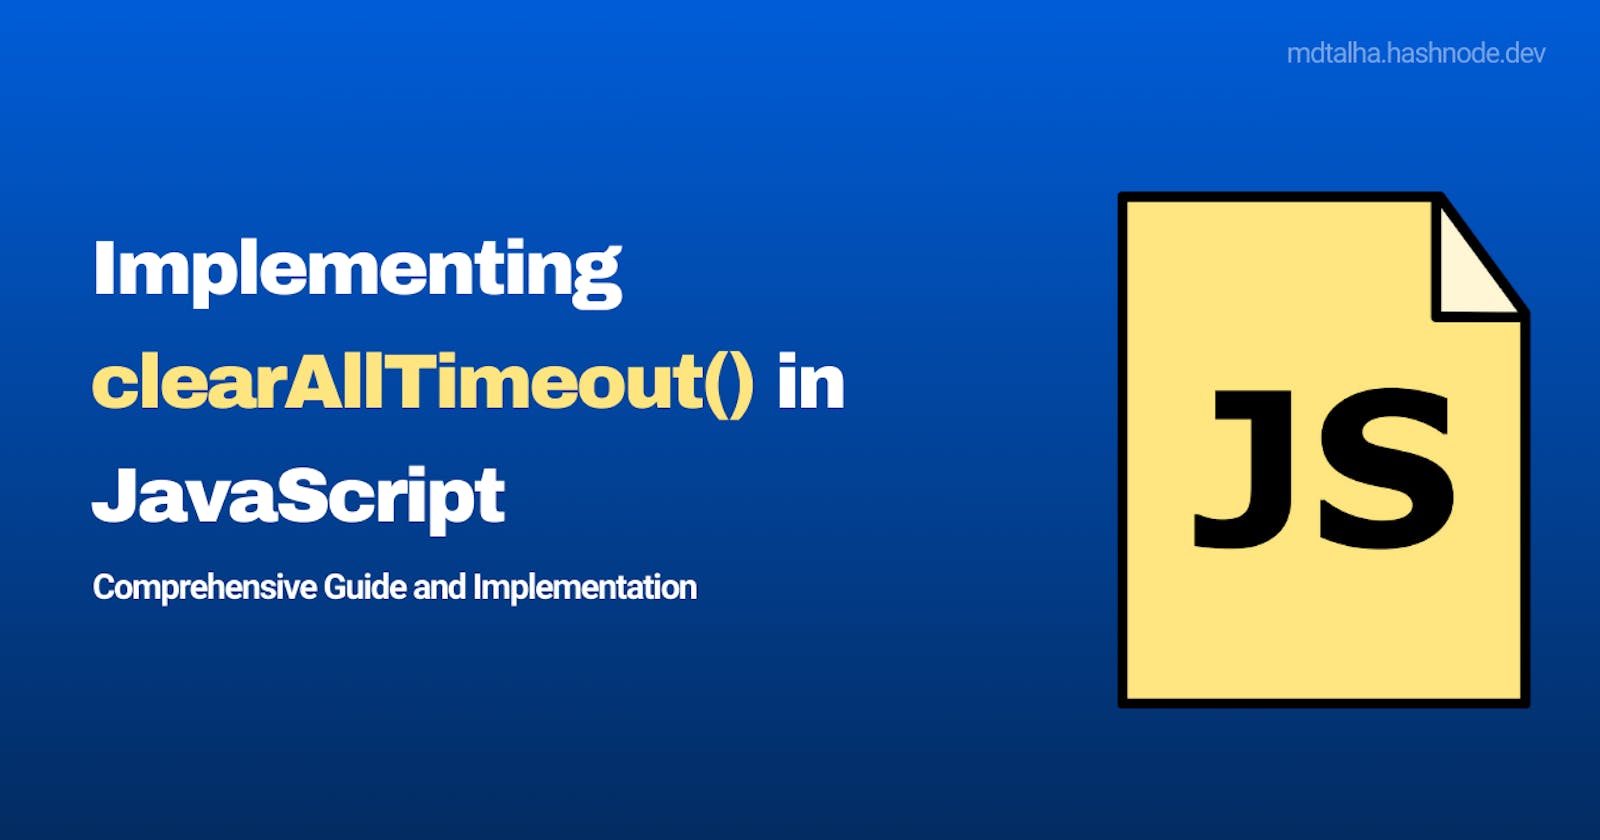 Implementing clearAllTimeout() in JavaScript